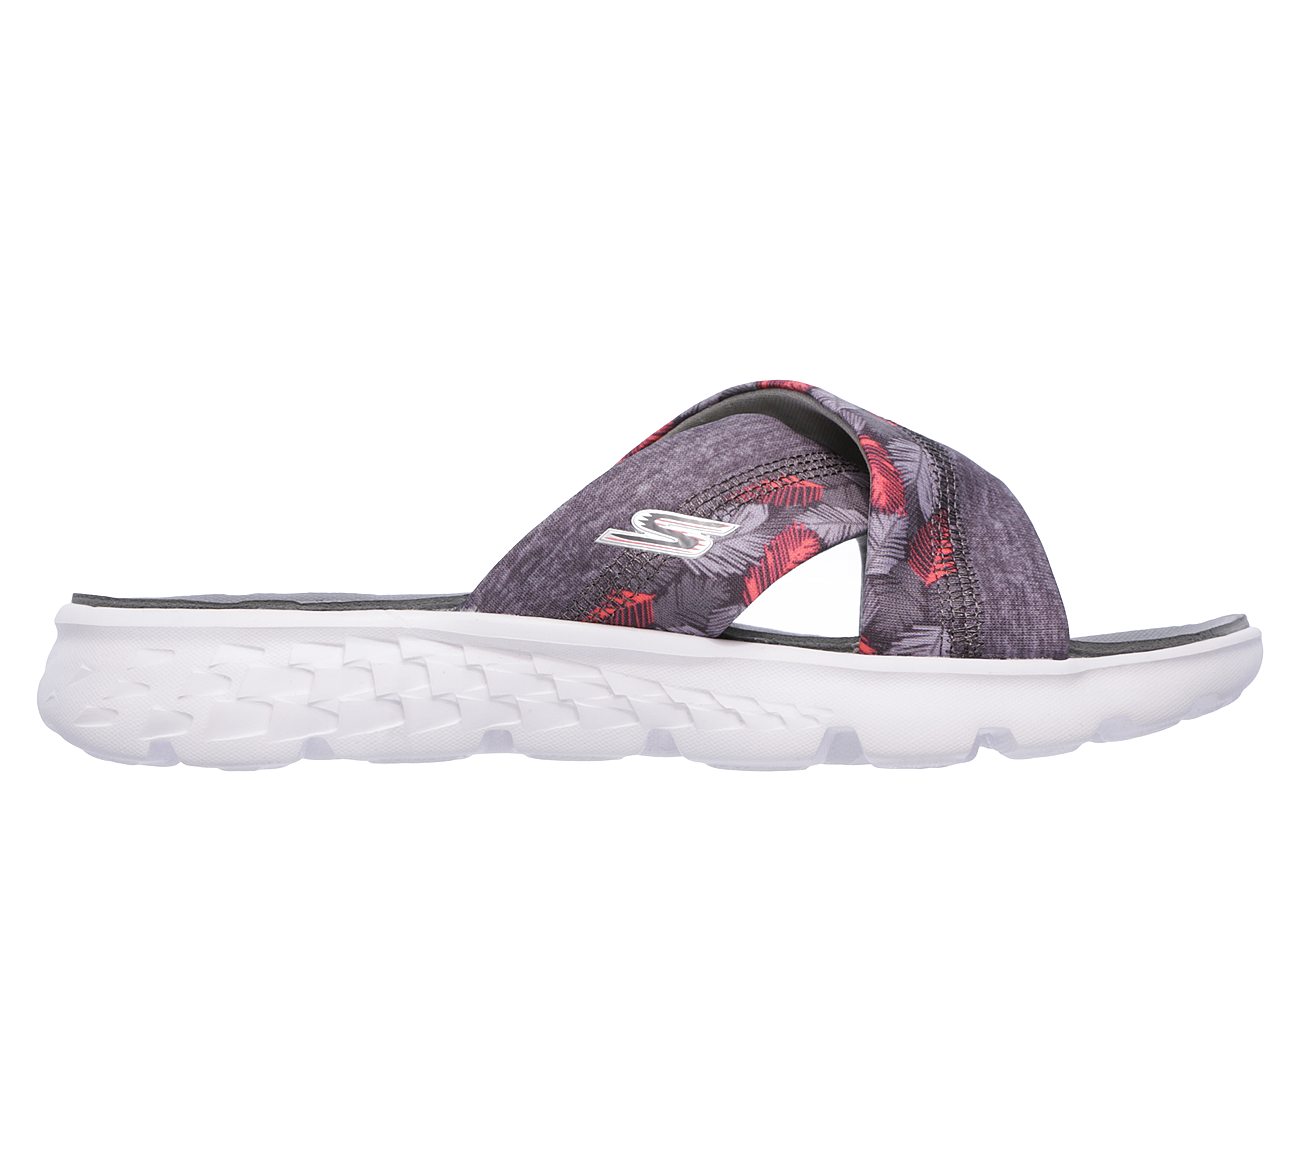 Tropical Skechers Performance Shoes